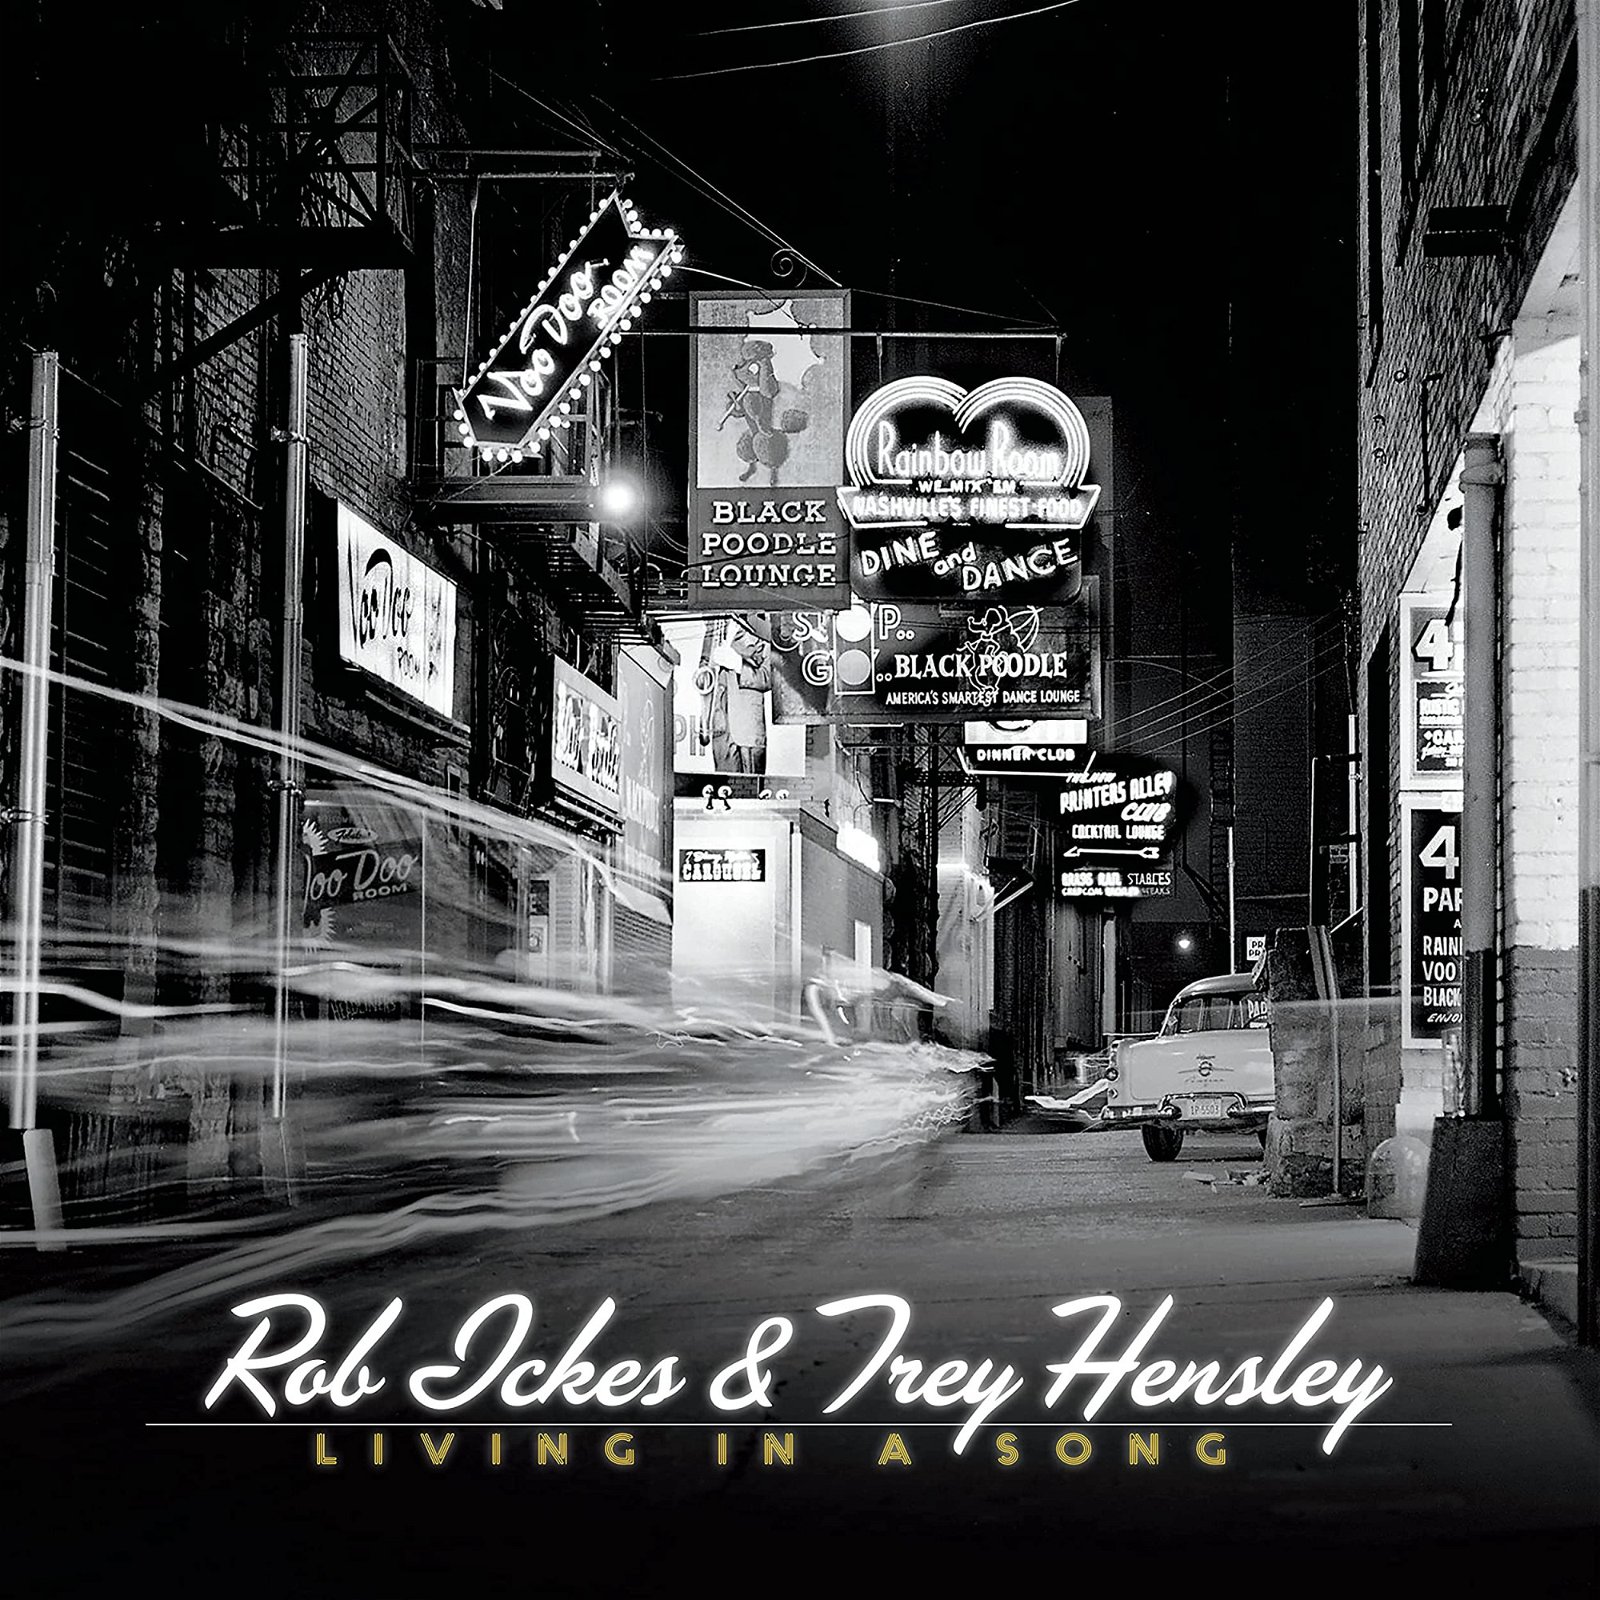 CD Shop - ICKERS, ROB & TREY HENSLE LIVING IN A SONG